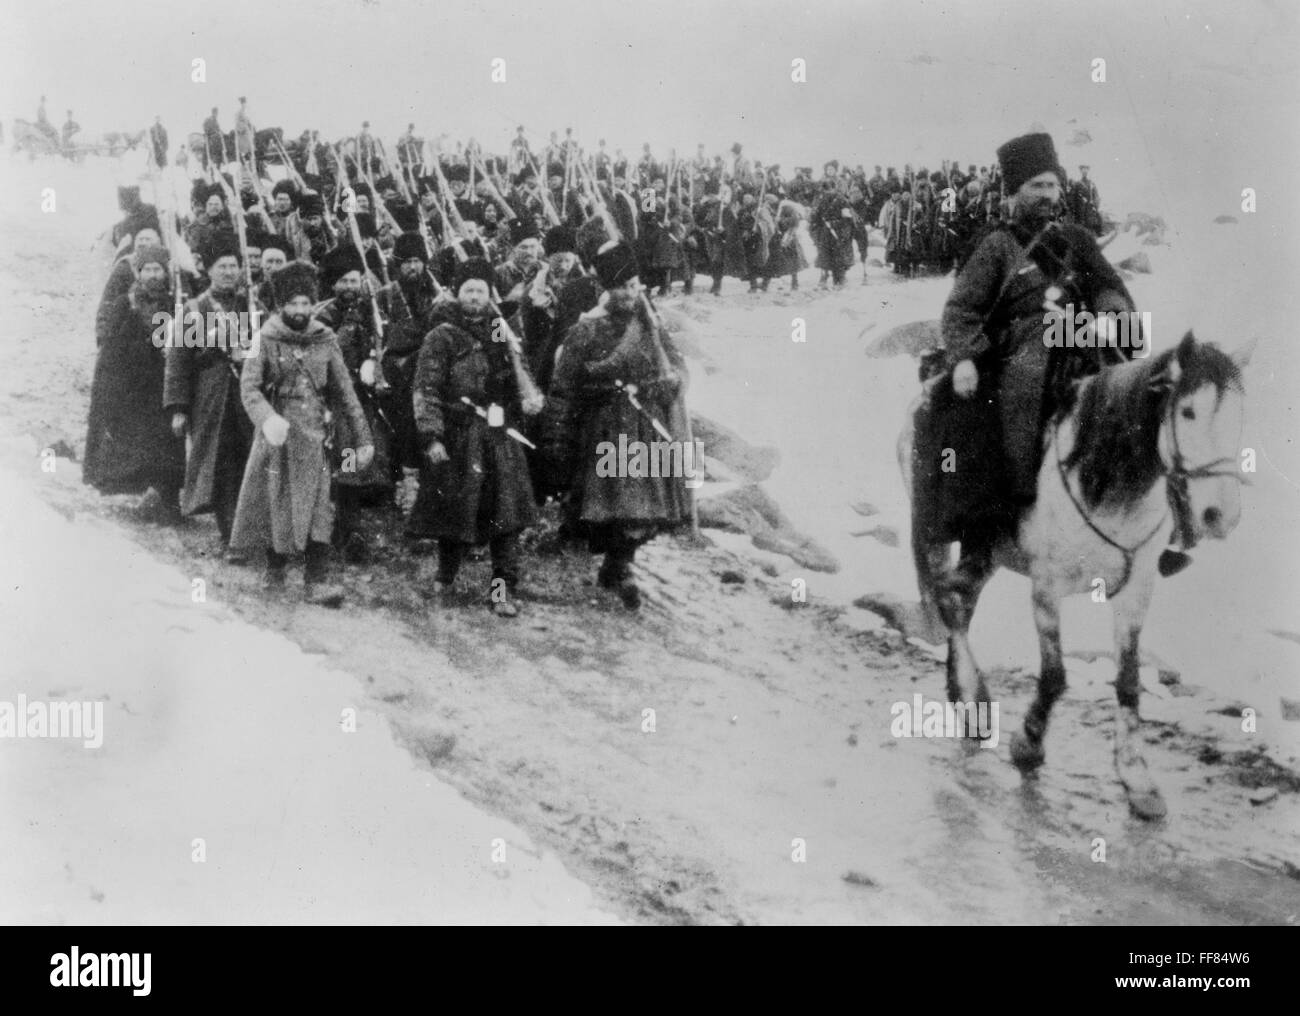 WORLD WAR I: RUSSIAN ARMY. /nRussian troops marching through the snow during World War I. Stock Photo